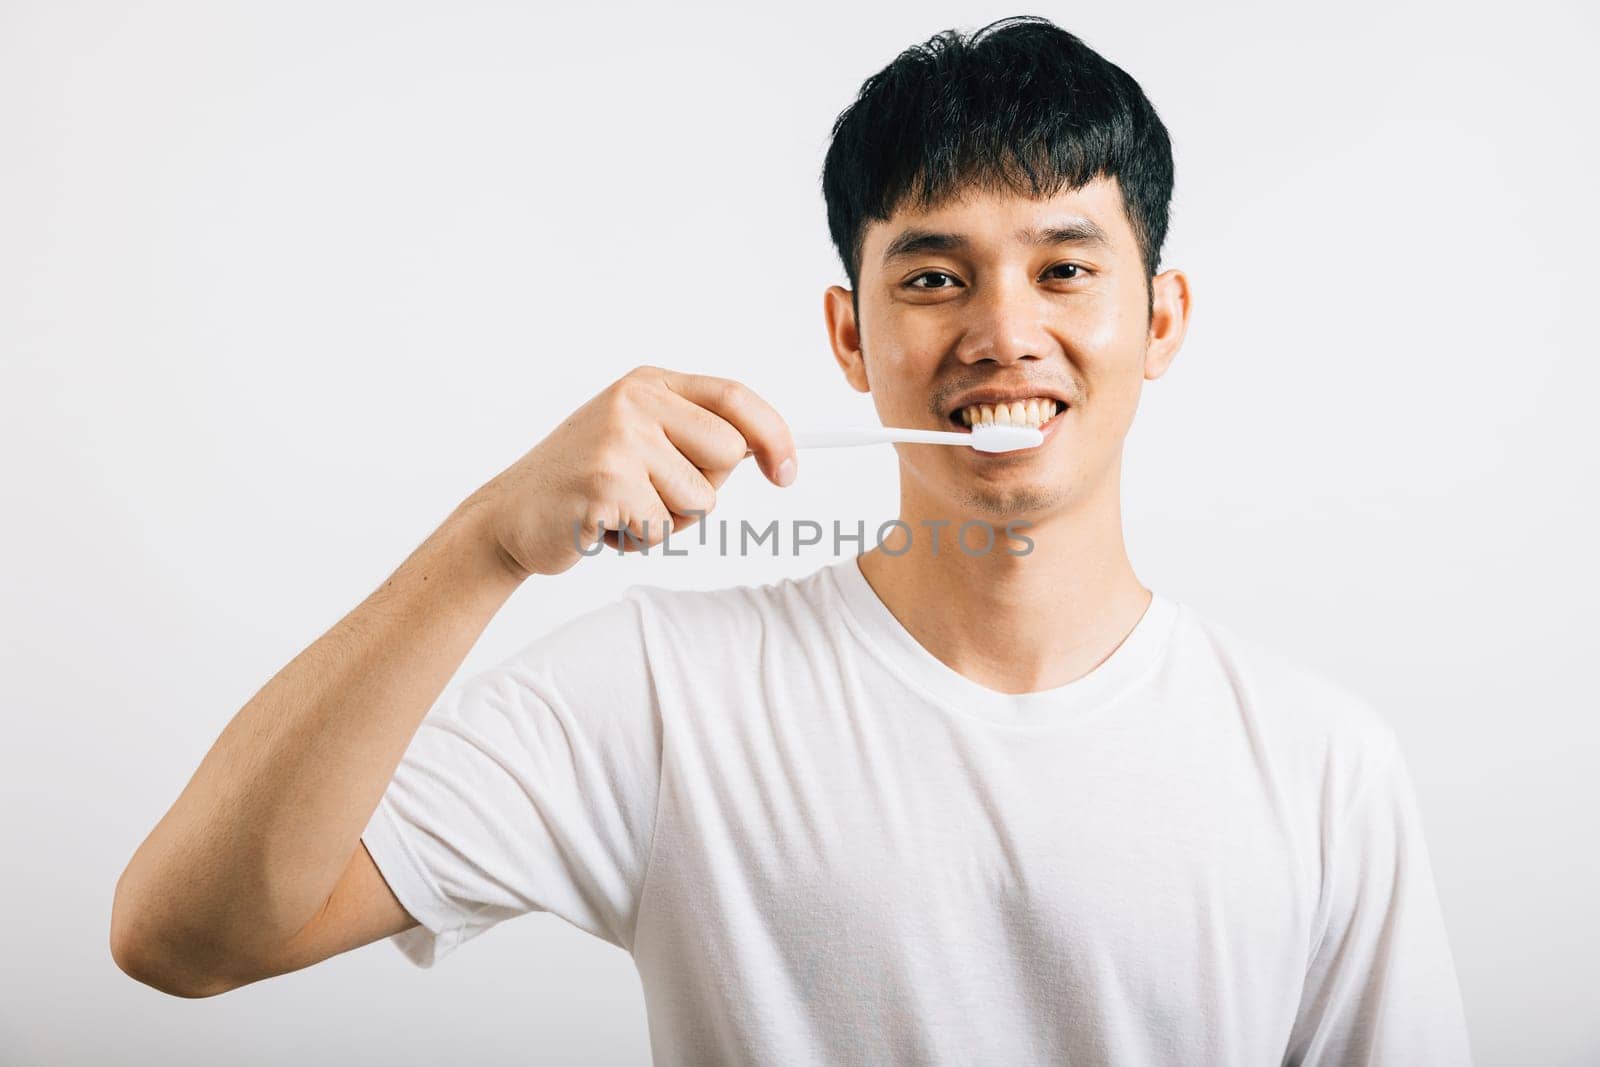 A confident Asian teenager promotes dental health by brushing his teeth with a smile. Studio shot isolated on white, emphasizing dental care and oral hygiene.